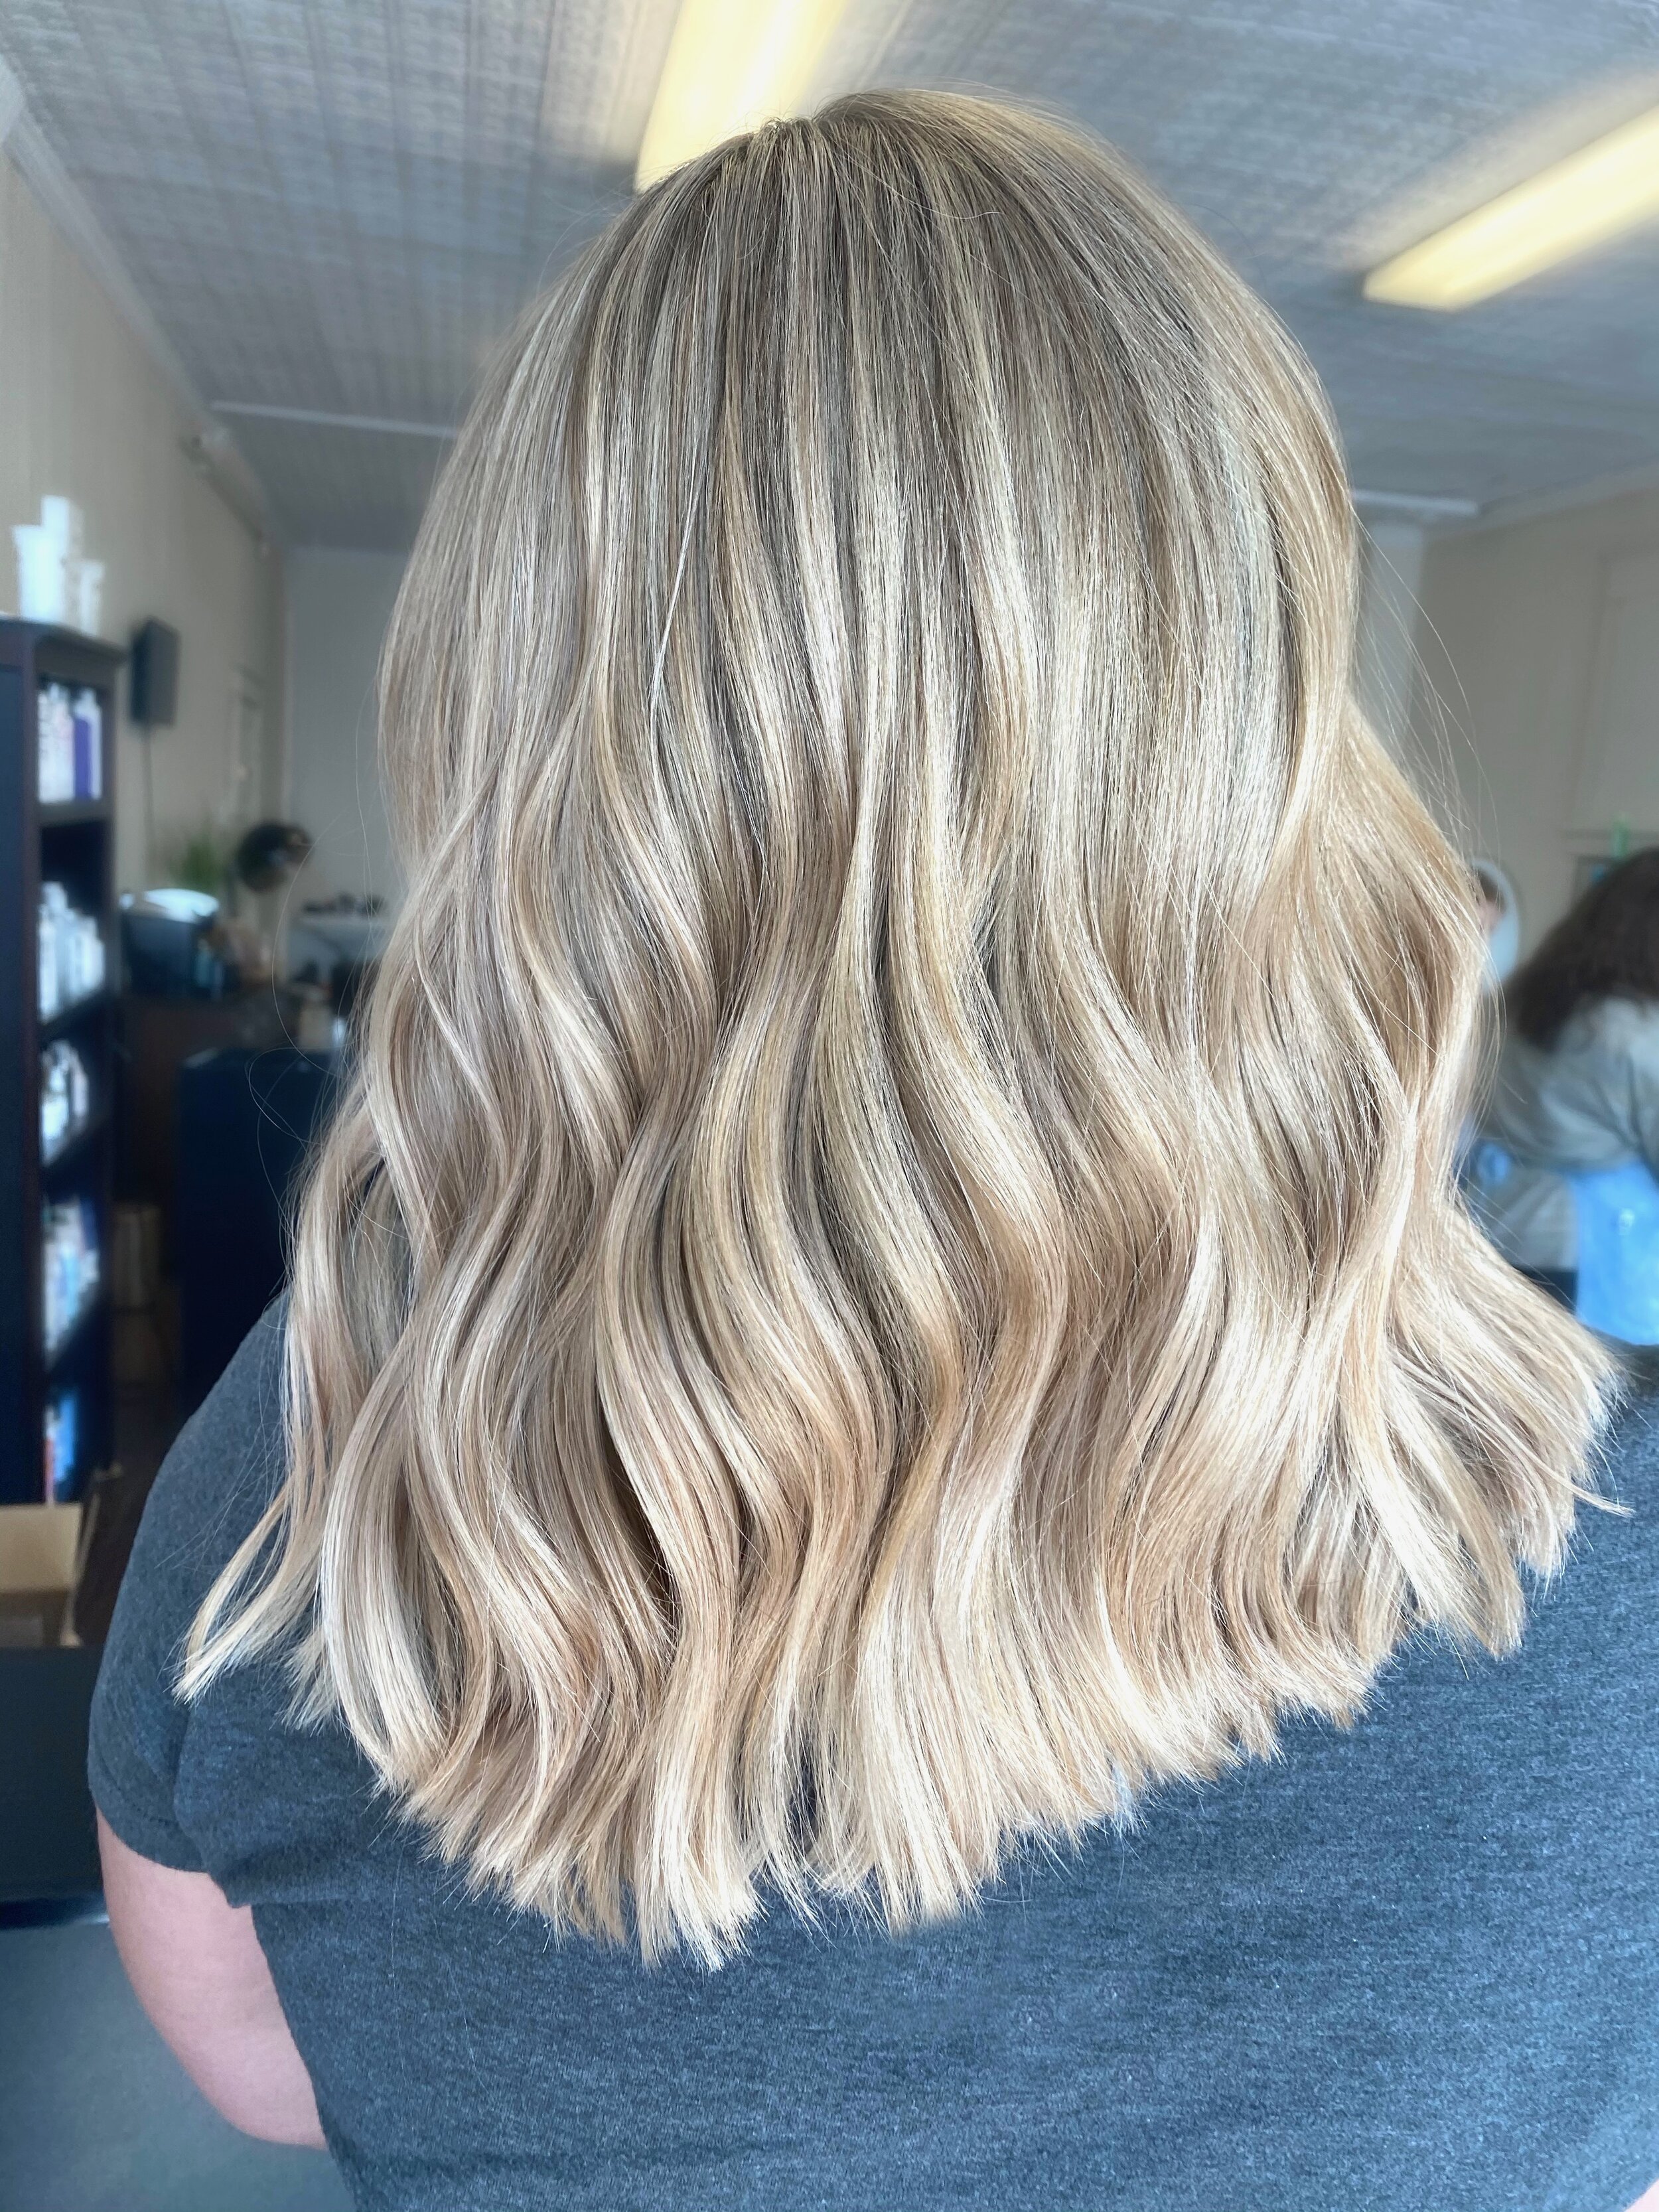 personalized blonding created by Michaela Giard